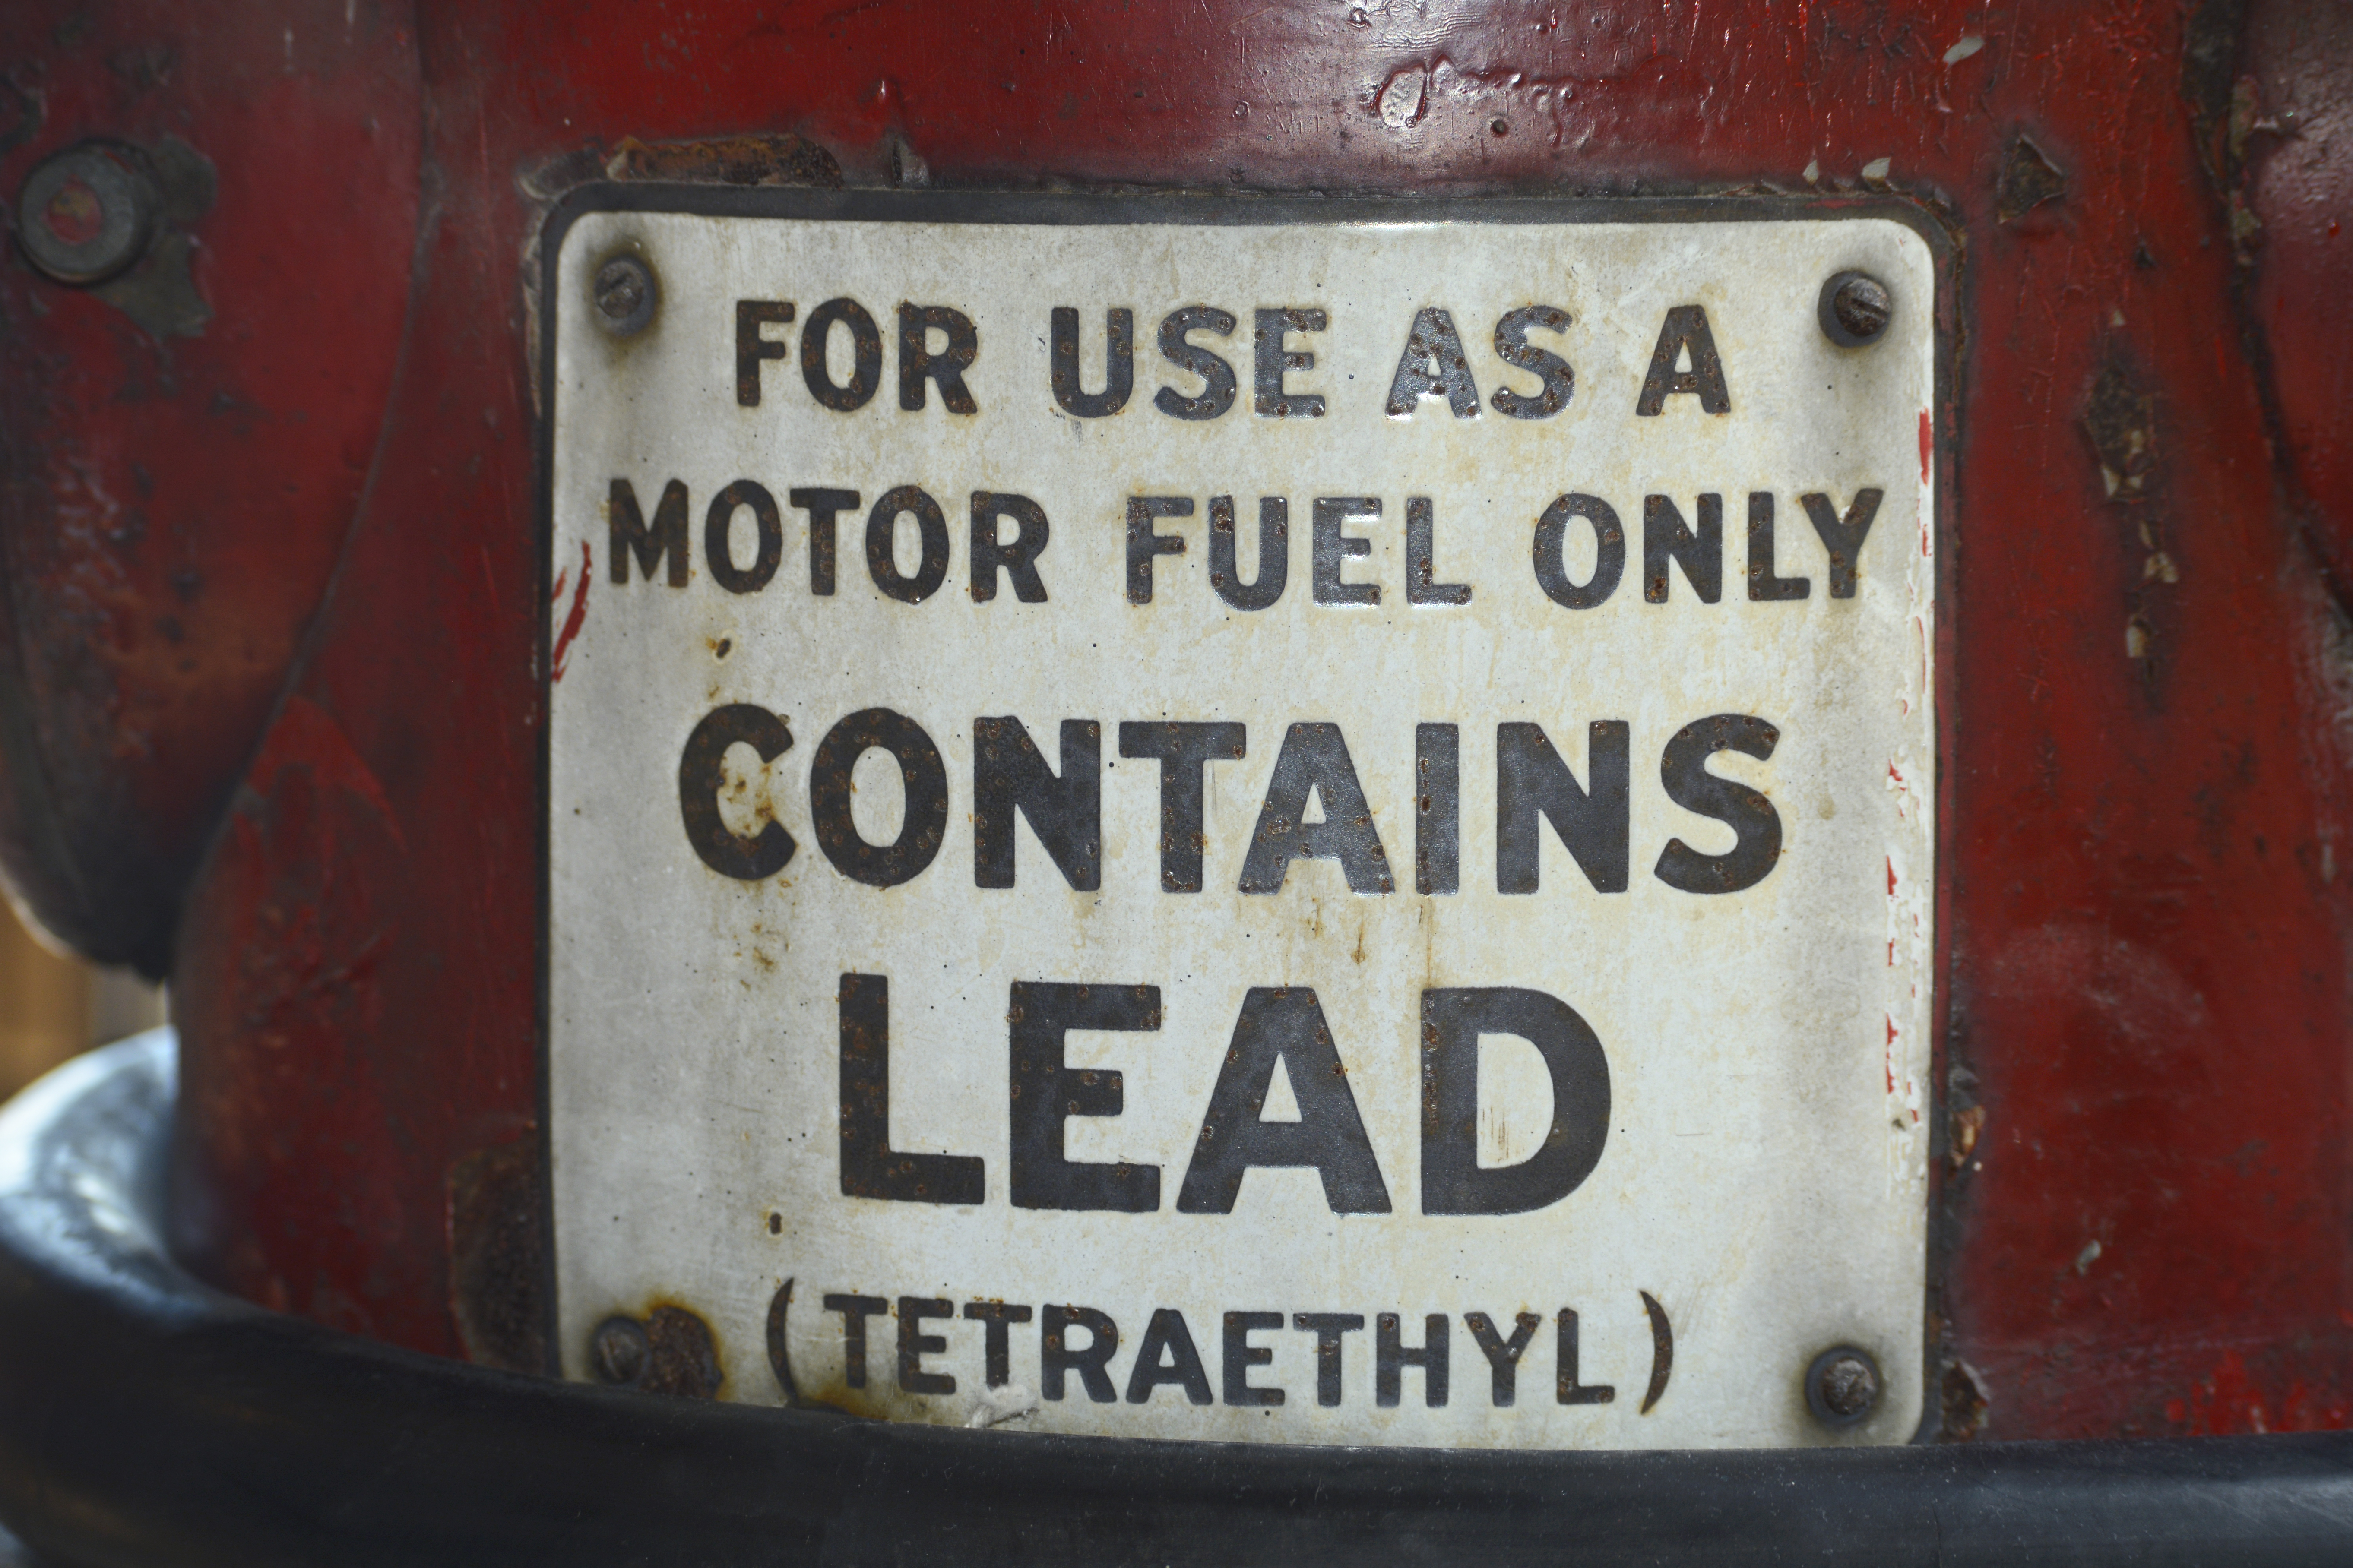 A metal container with a label reading “For use as a motor fuel only. Contains lead (tetraethyl)”